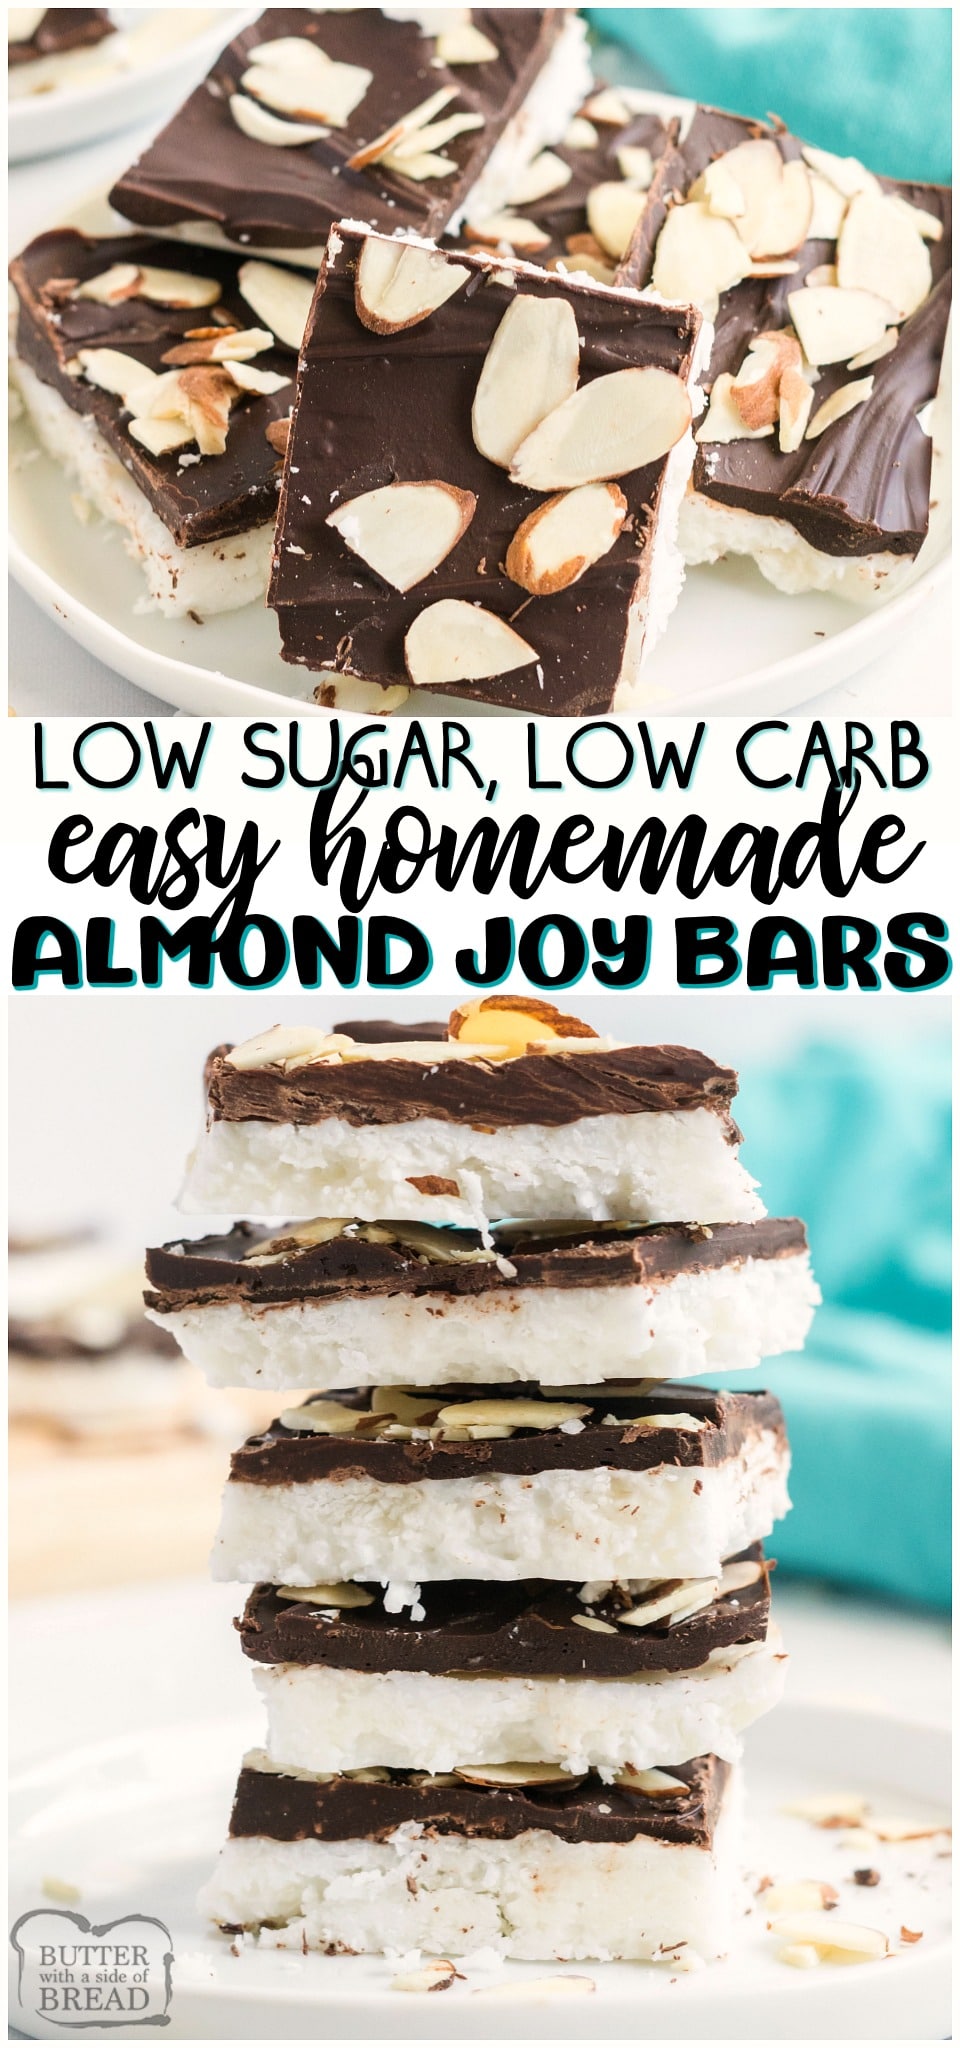 Homemade Almond Joy Bars made EASY with just 5 ingredients and healthier than store-bought! Fantastic low carb, low sugar treat for chocolate coconut lovers. 